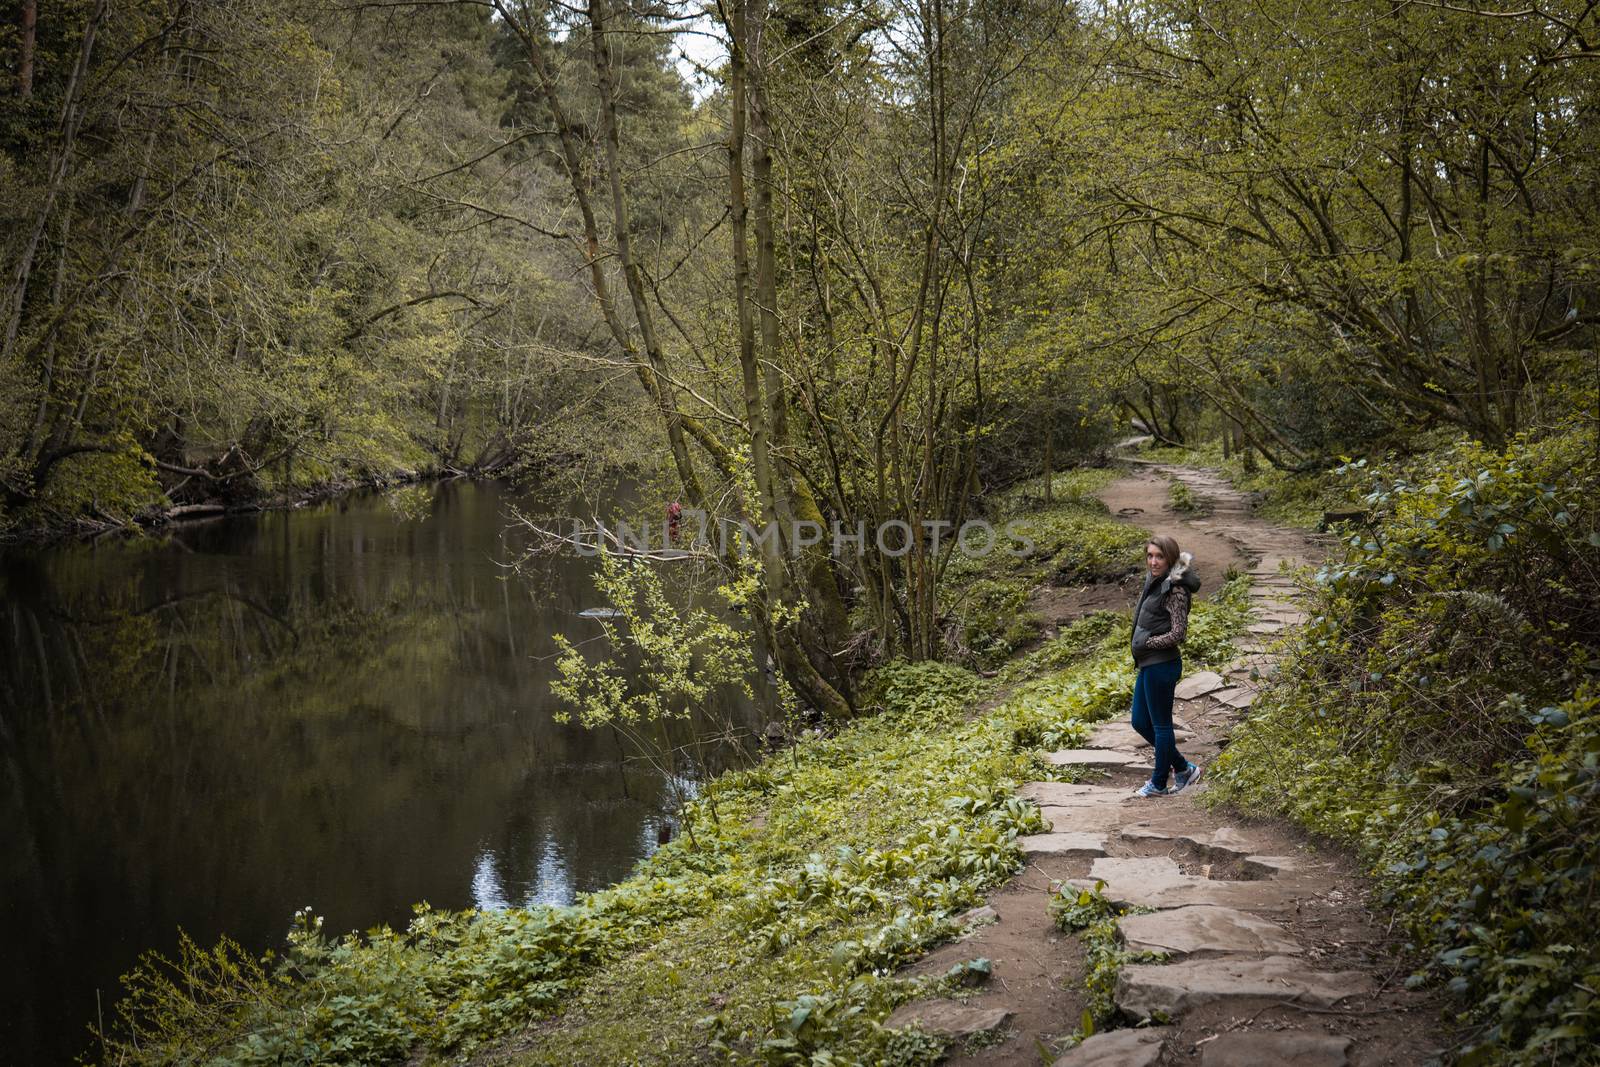 A young woman stood on a stone pavement path in the countryside